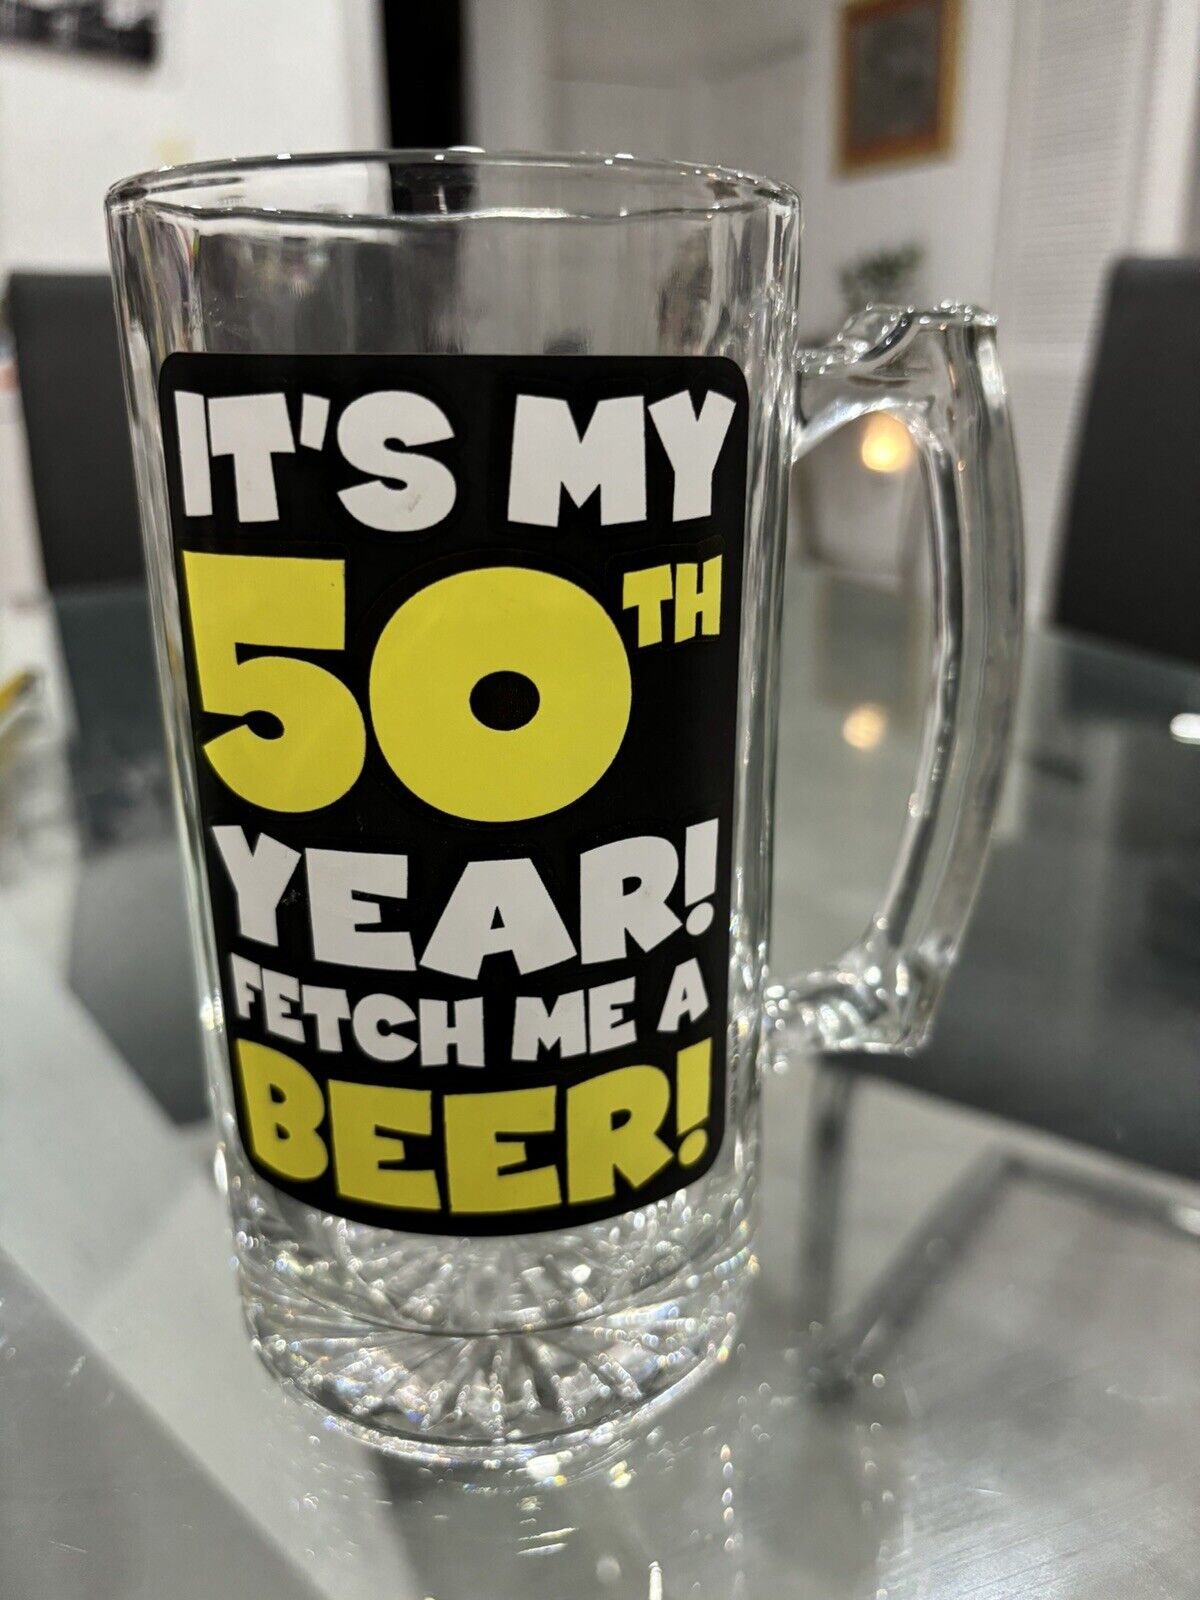 It’s my 50th year  fetch me a beer glass beer mug XL